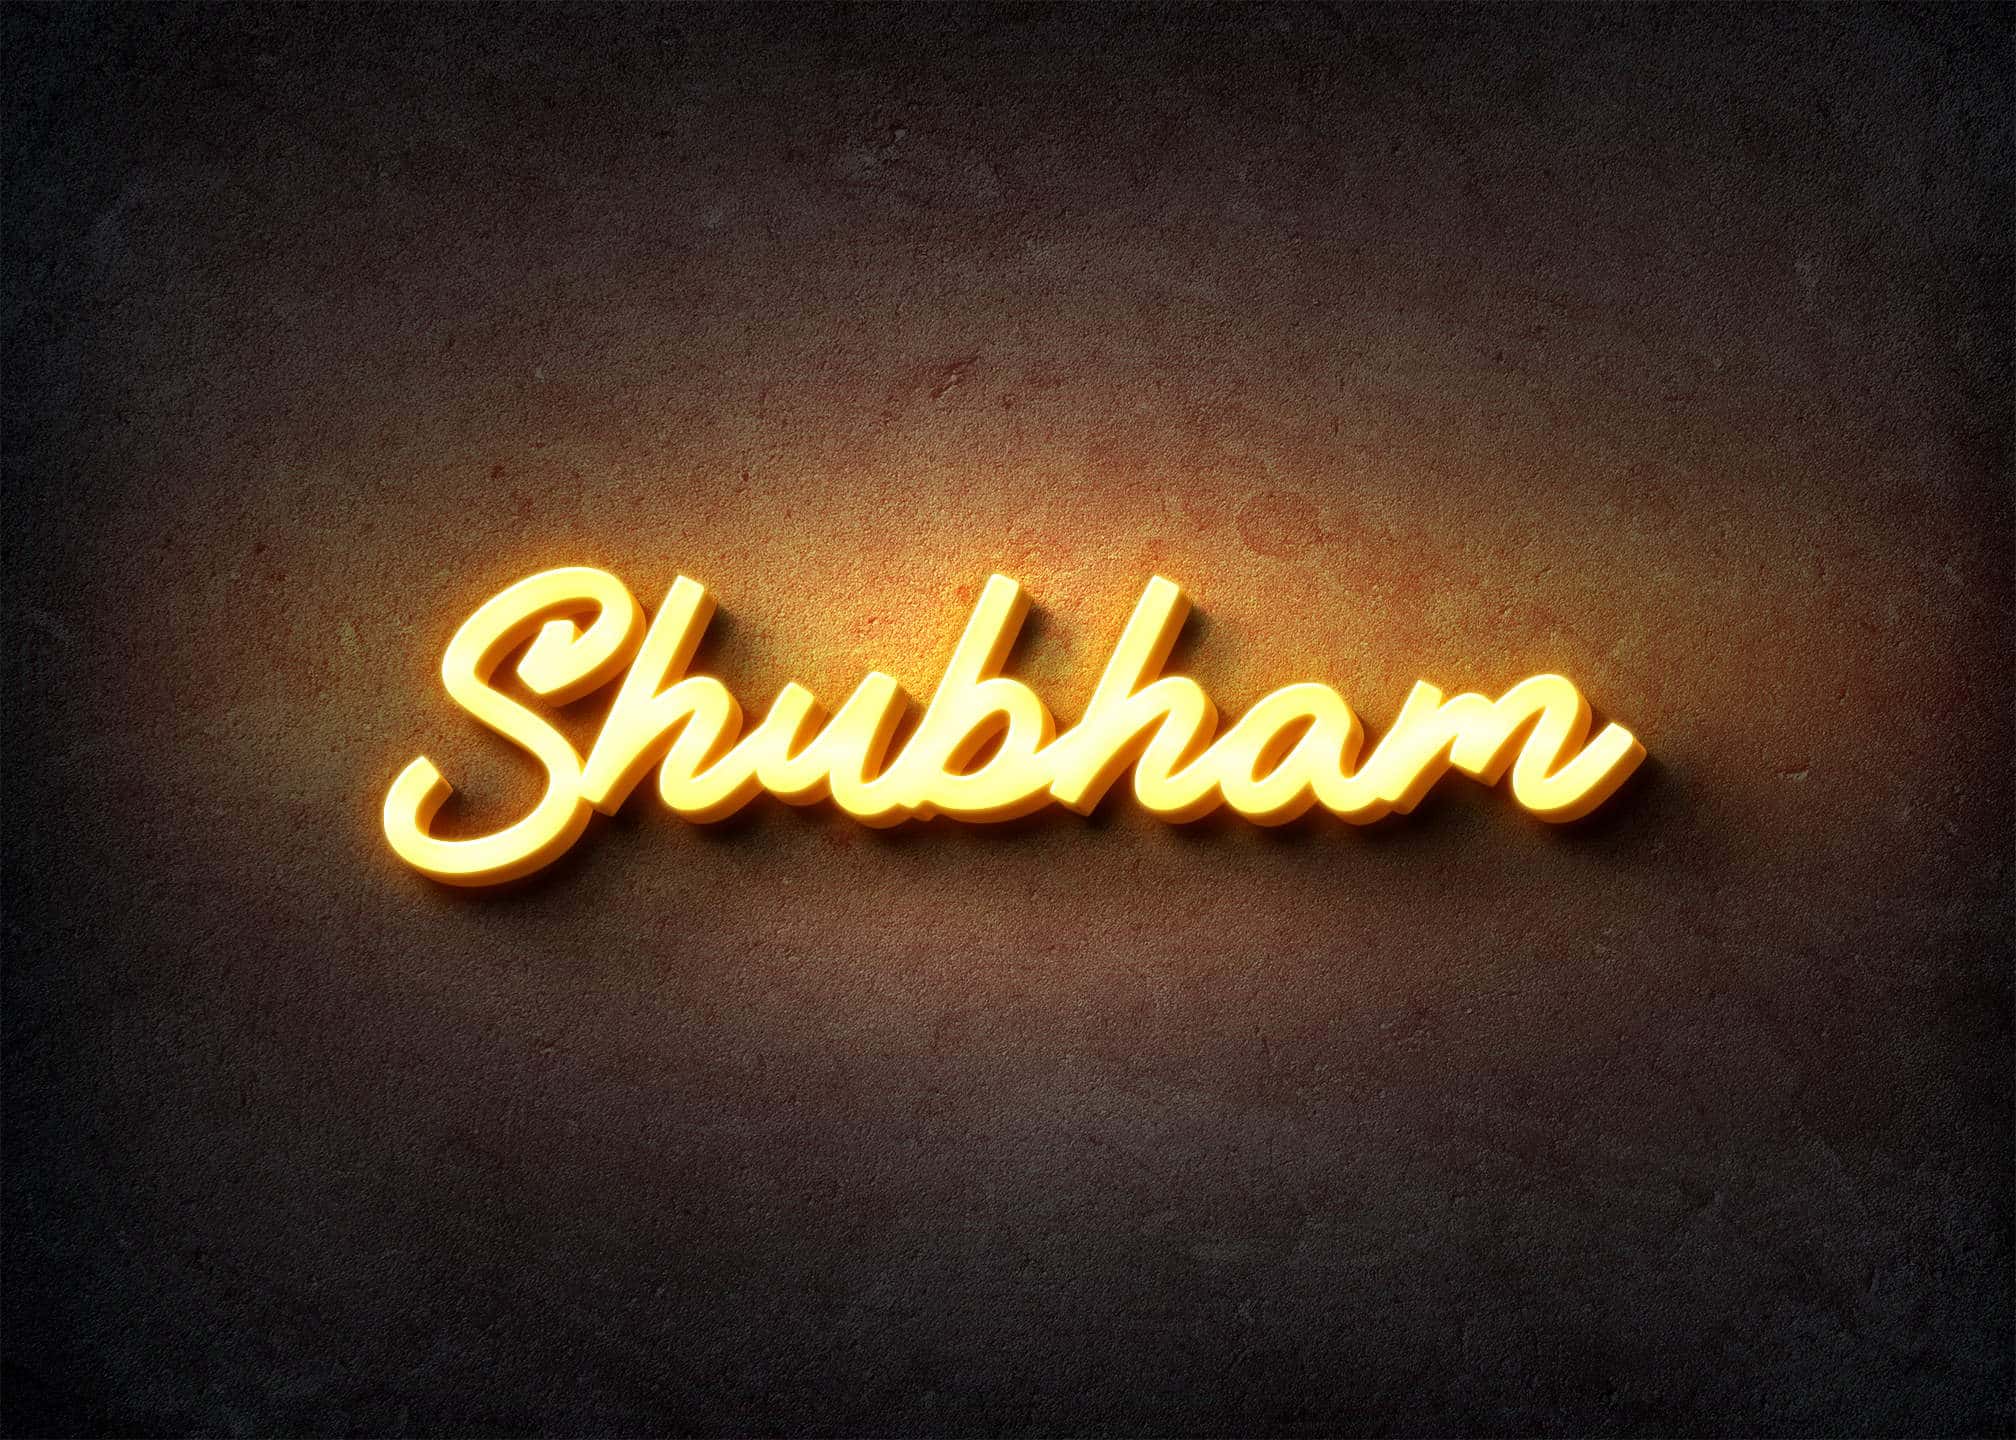 Stream SHUBHAM music | Listen to songs, albums, playlists for free on  SoundCloud